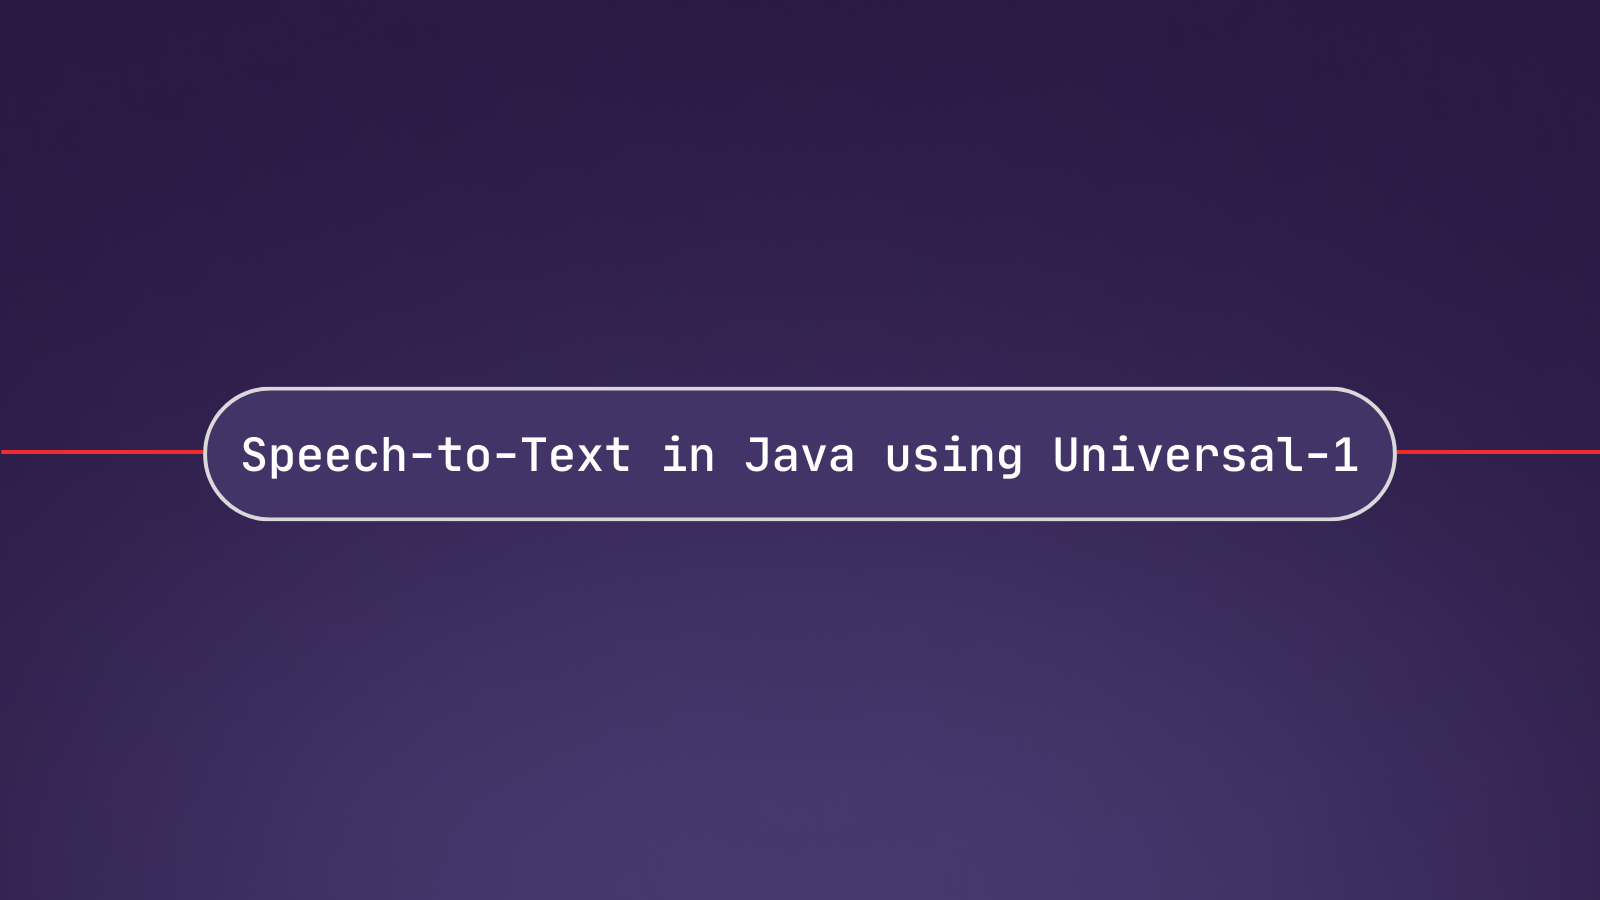 Speech-to-Text in Java using Universal-1